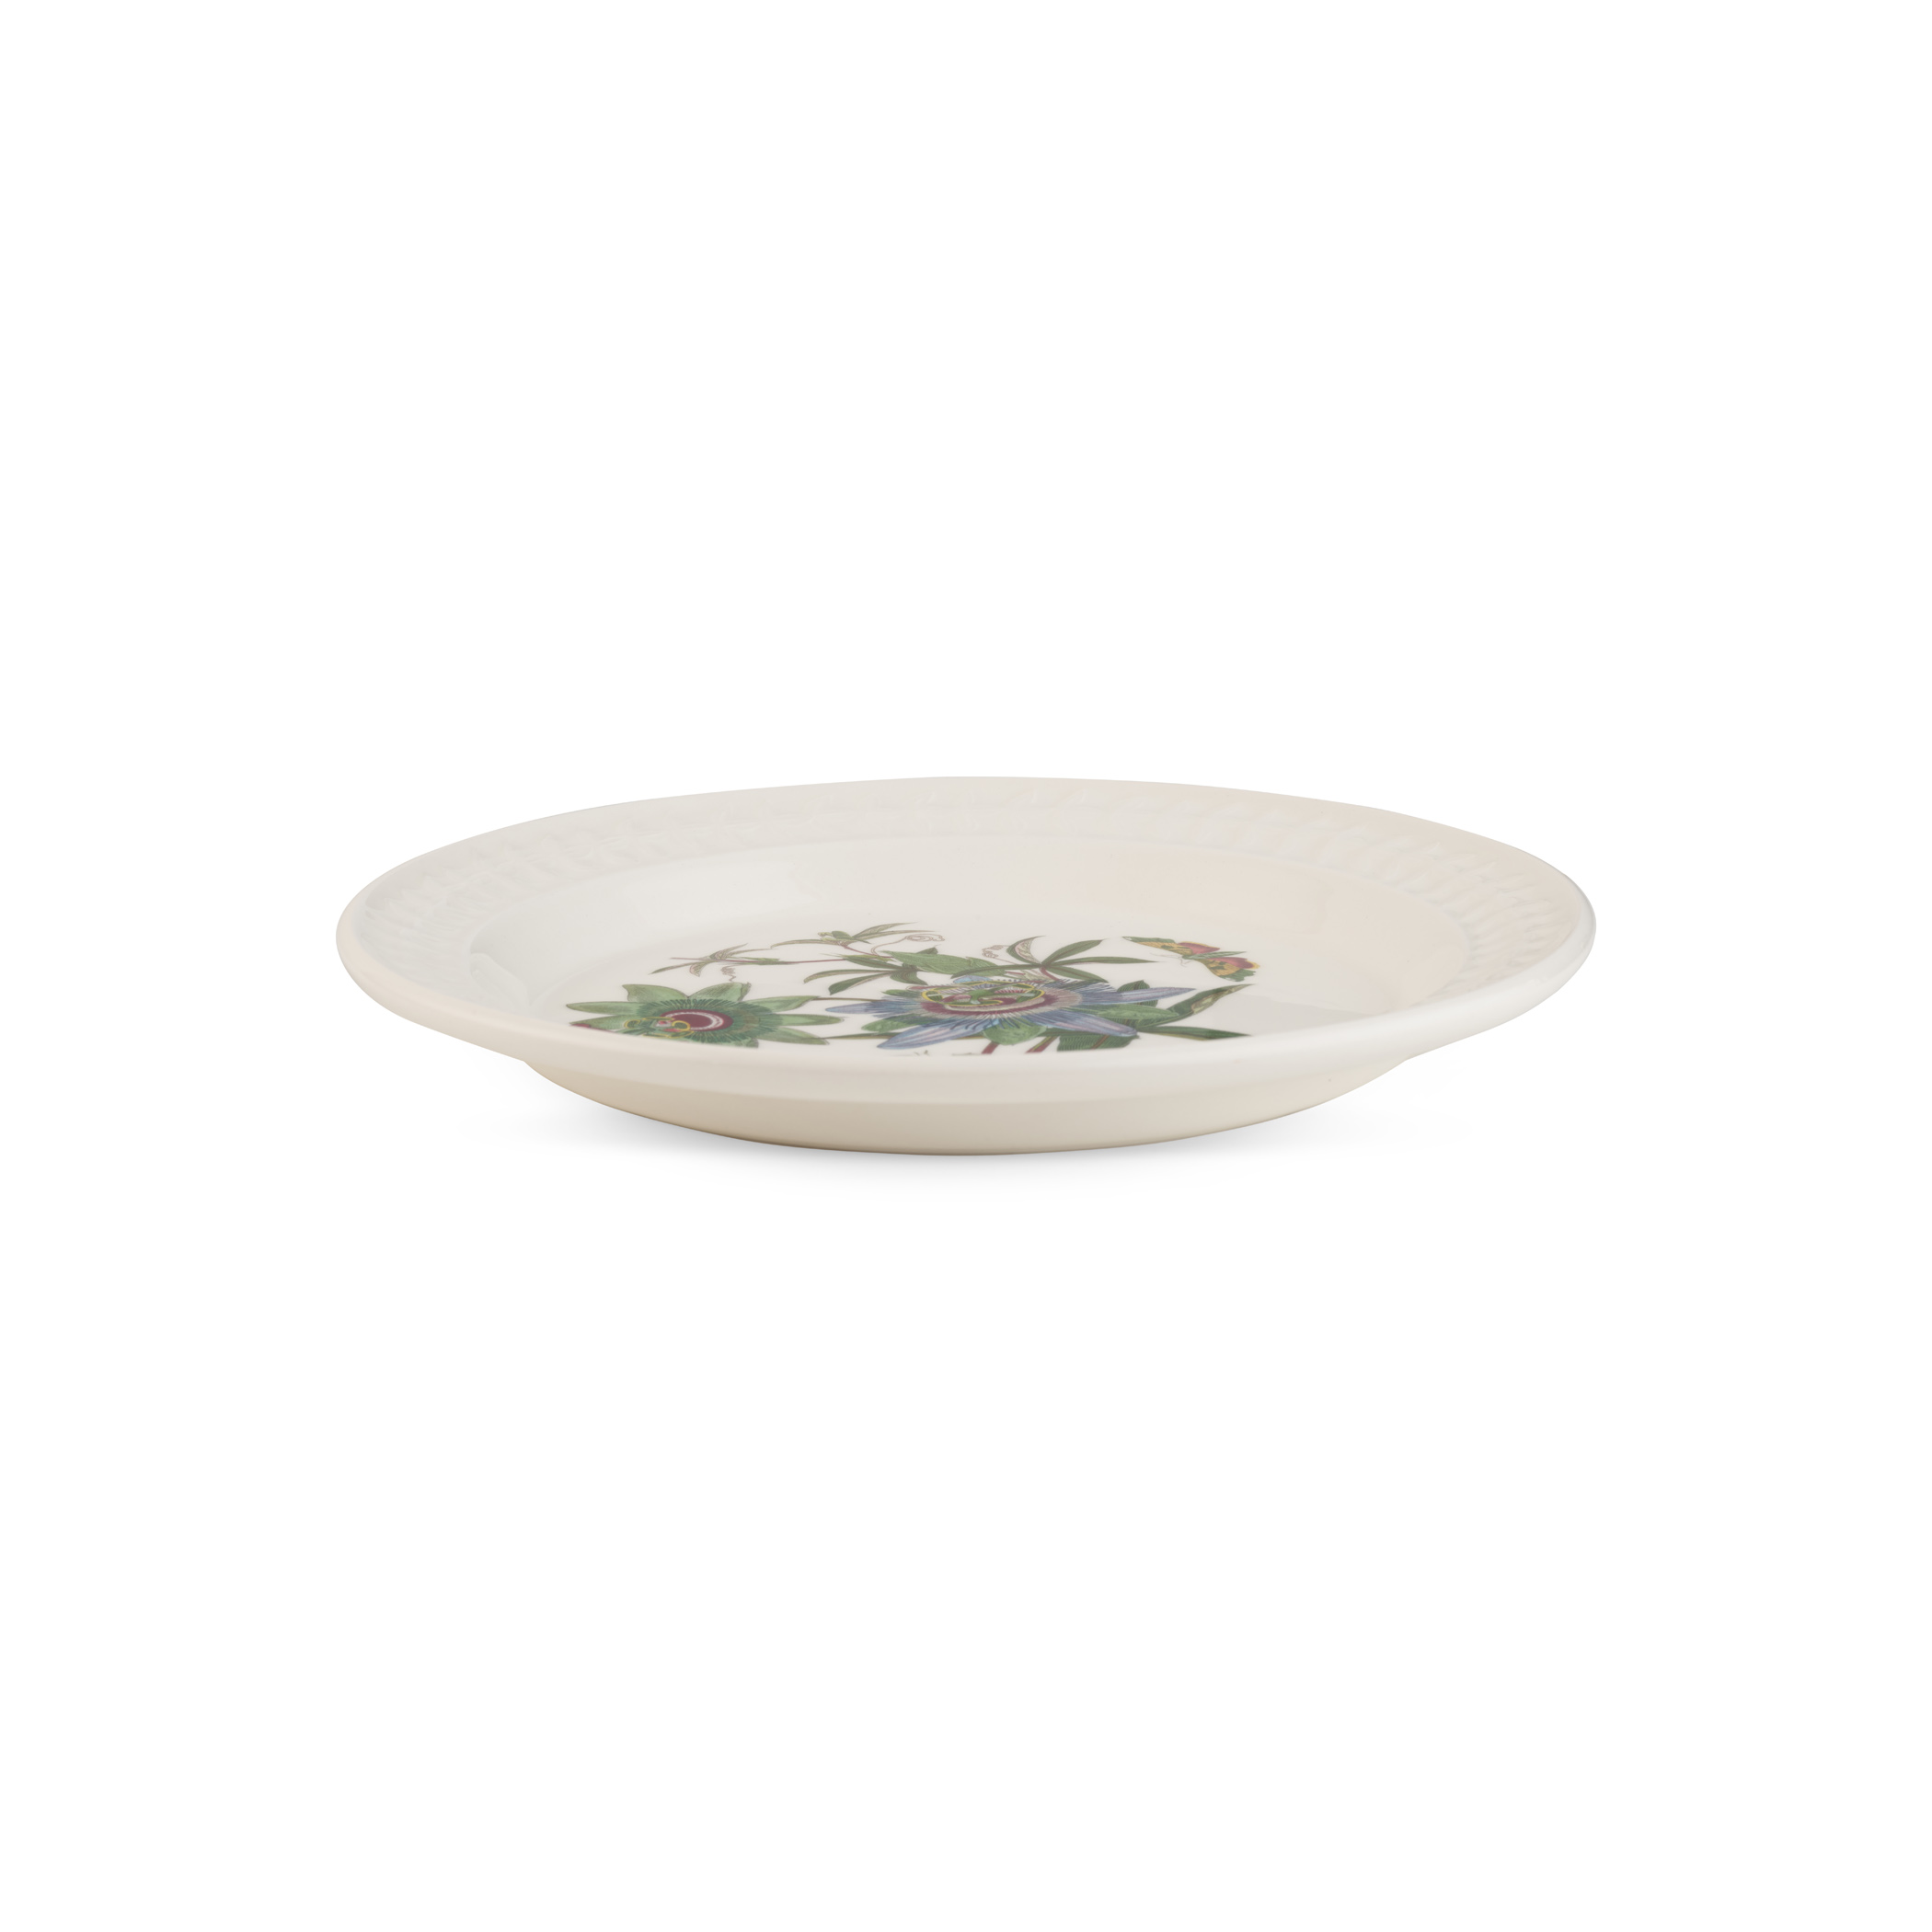 Botanic Garden Harmony Papilio Amber 10.5 Inch Dinner Plate (Blue Passion) image number null